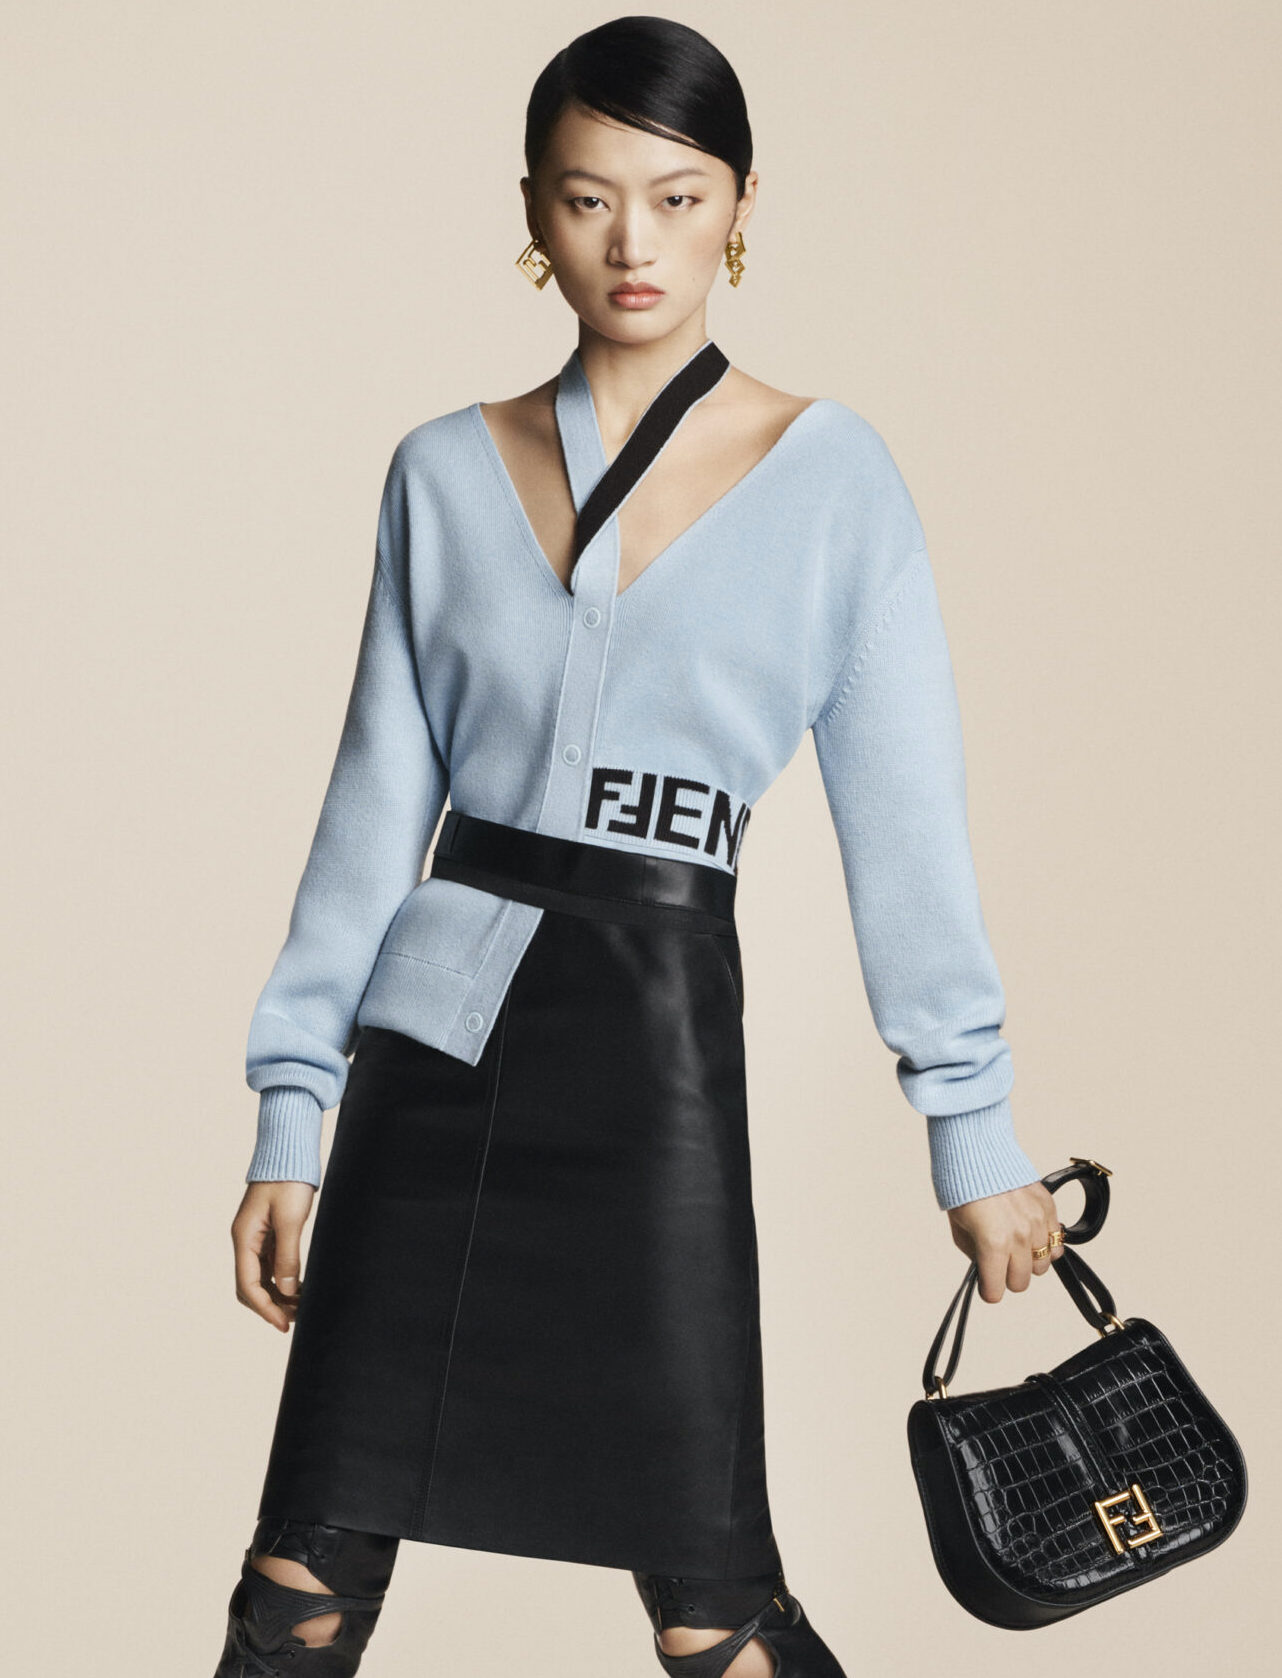 FENDI Goes PUNK and Practical with Newest Autumn/Winter 2023 Campaign ...